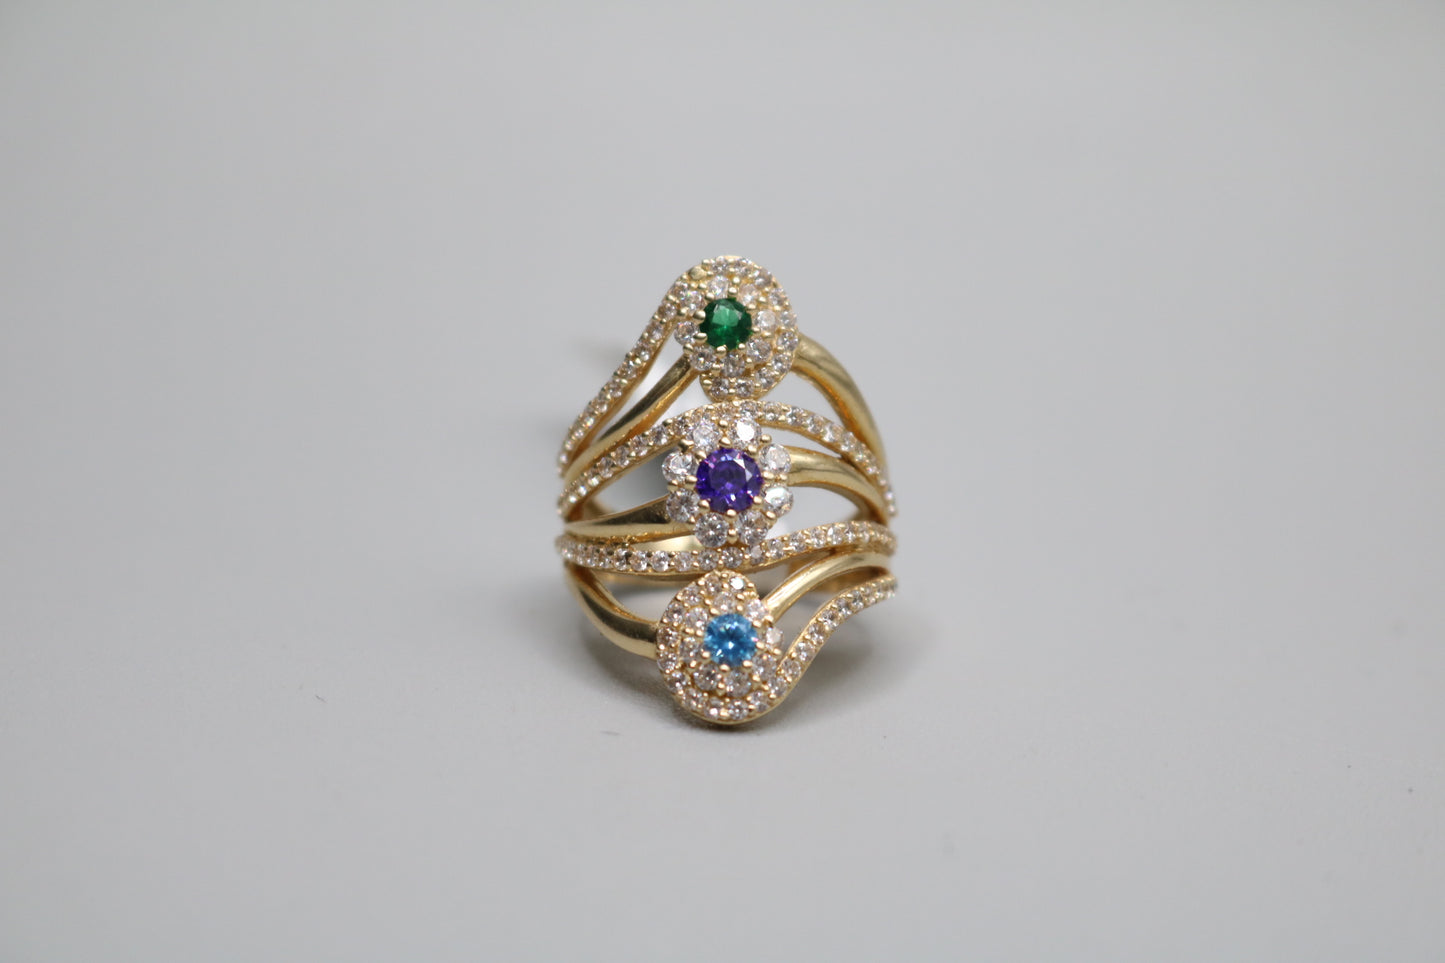 14K Yellow Gold Ring with Multi-Color Stones (Size 6 1/2)